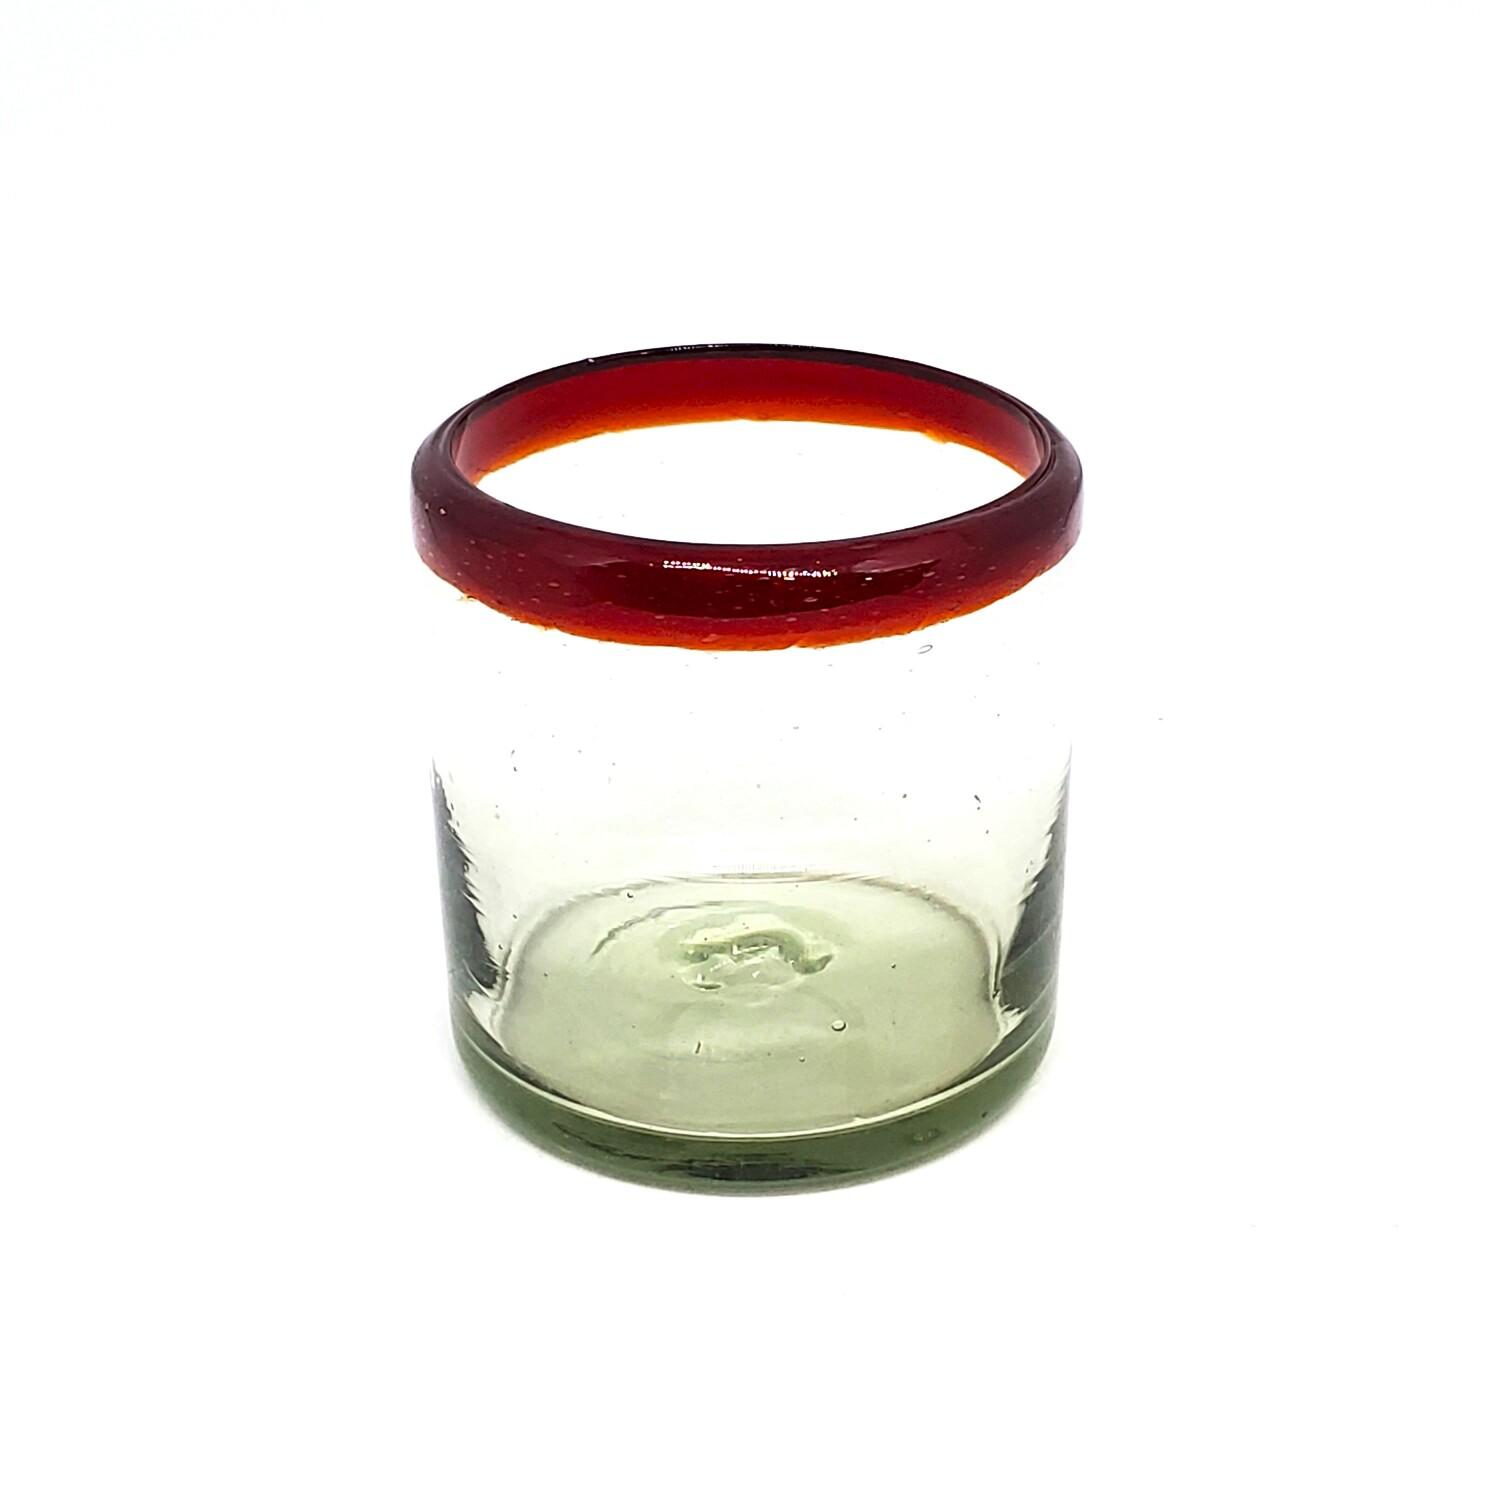 Wholesale Colored Rim Glassware / Ruby Red Rim 8 oz DOF Rock Glasses  / These Double Old Fashioned glasses deliver a classic touch to your favorite drink on the rocks.